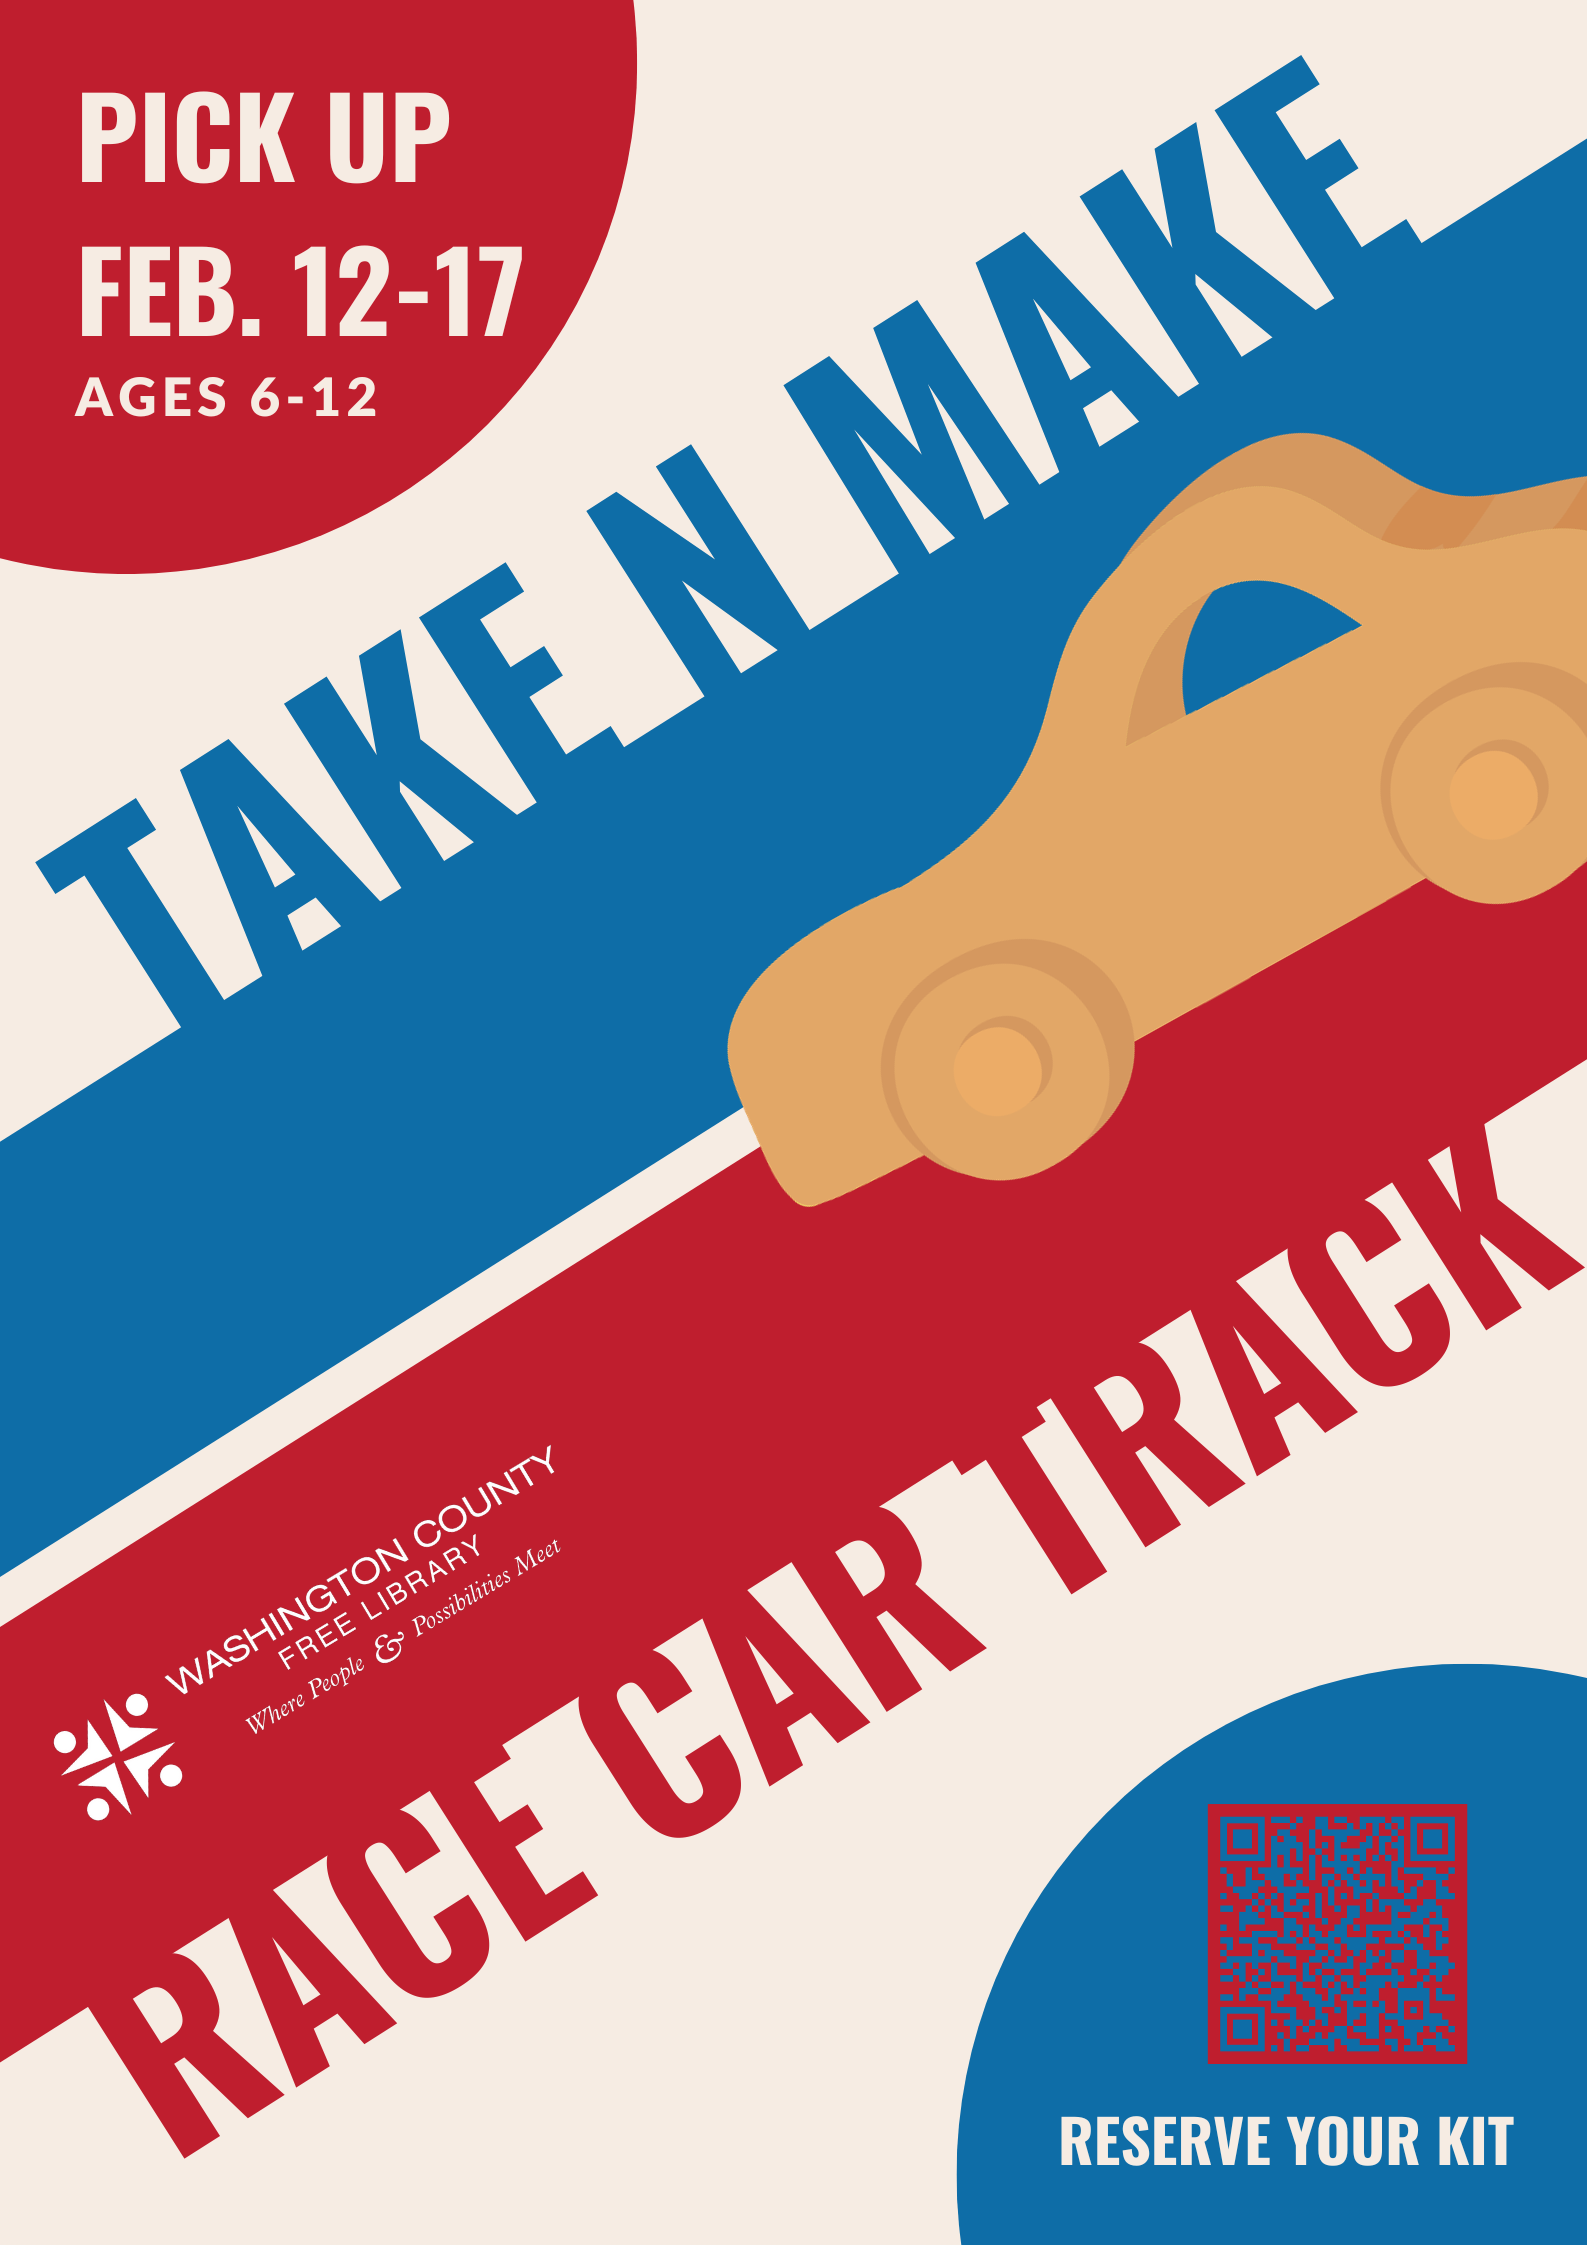 A wooden car zooms in from the upper right hand corner towards the lower left corner on a blue and white track. The poster reads: Take N Make Race Car Track. Pick Up February 12 through 17. Ages 6 to 12. Reserve your kit" with a red and blue QR code in the lower right corner. 